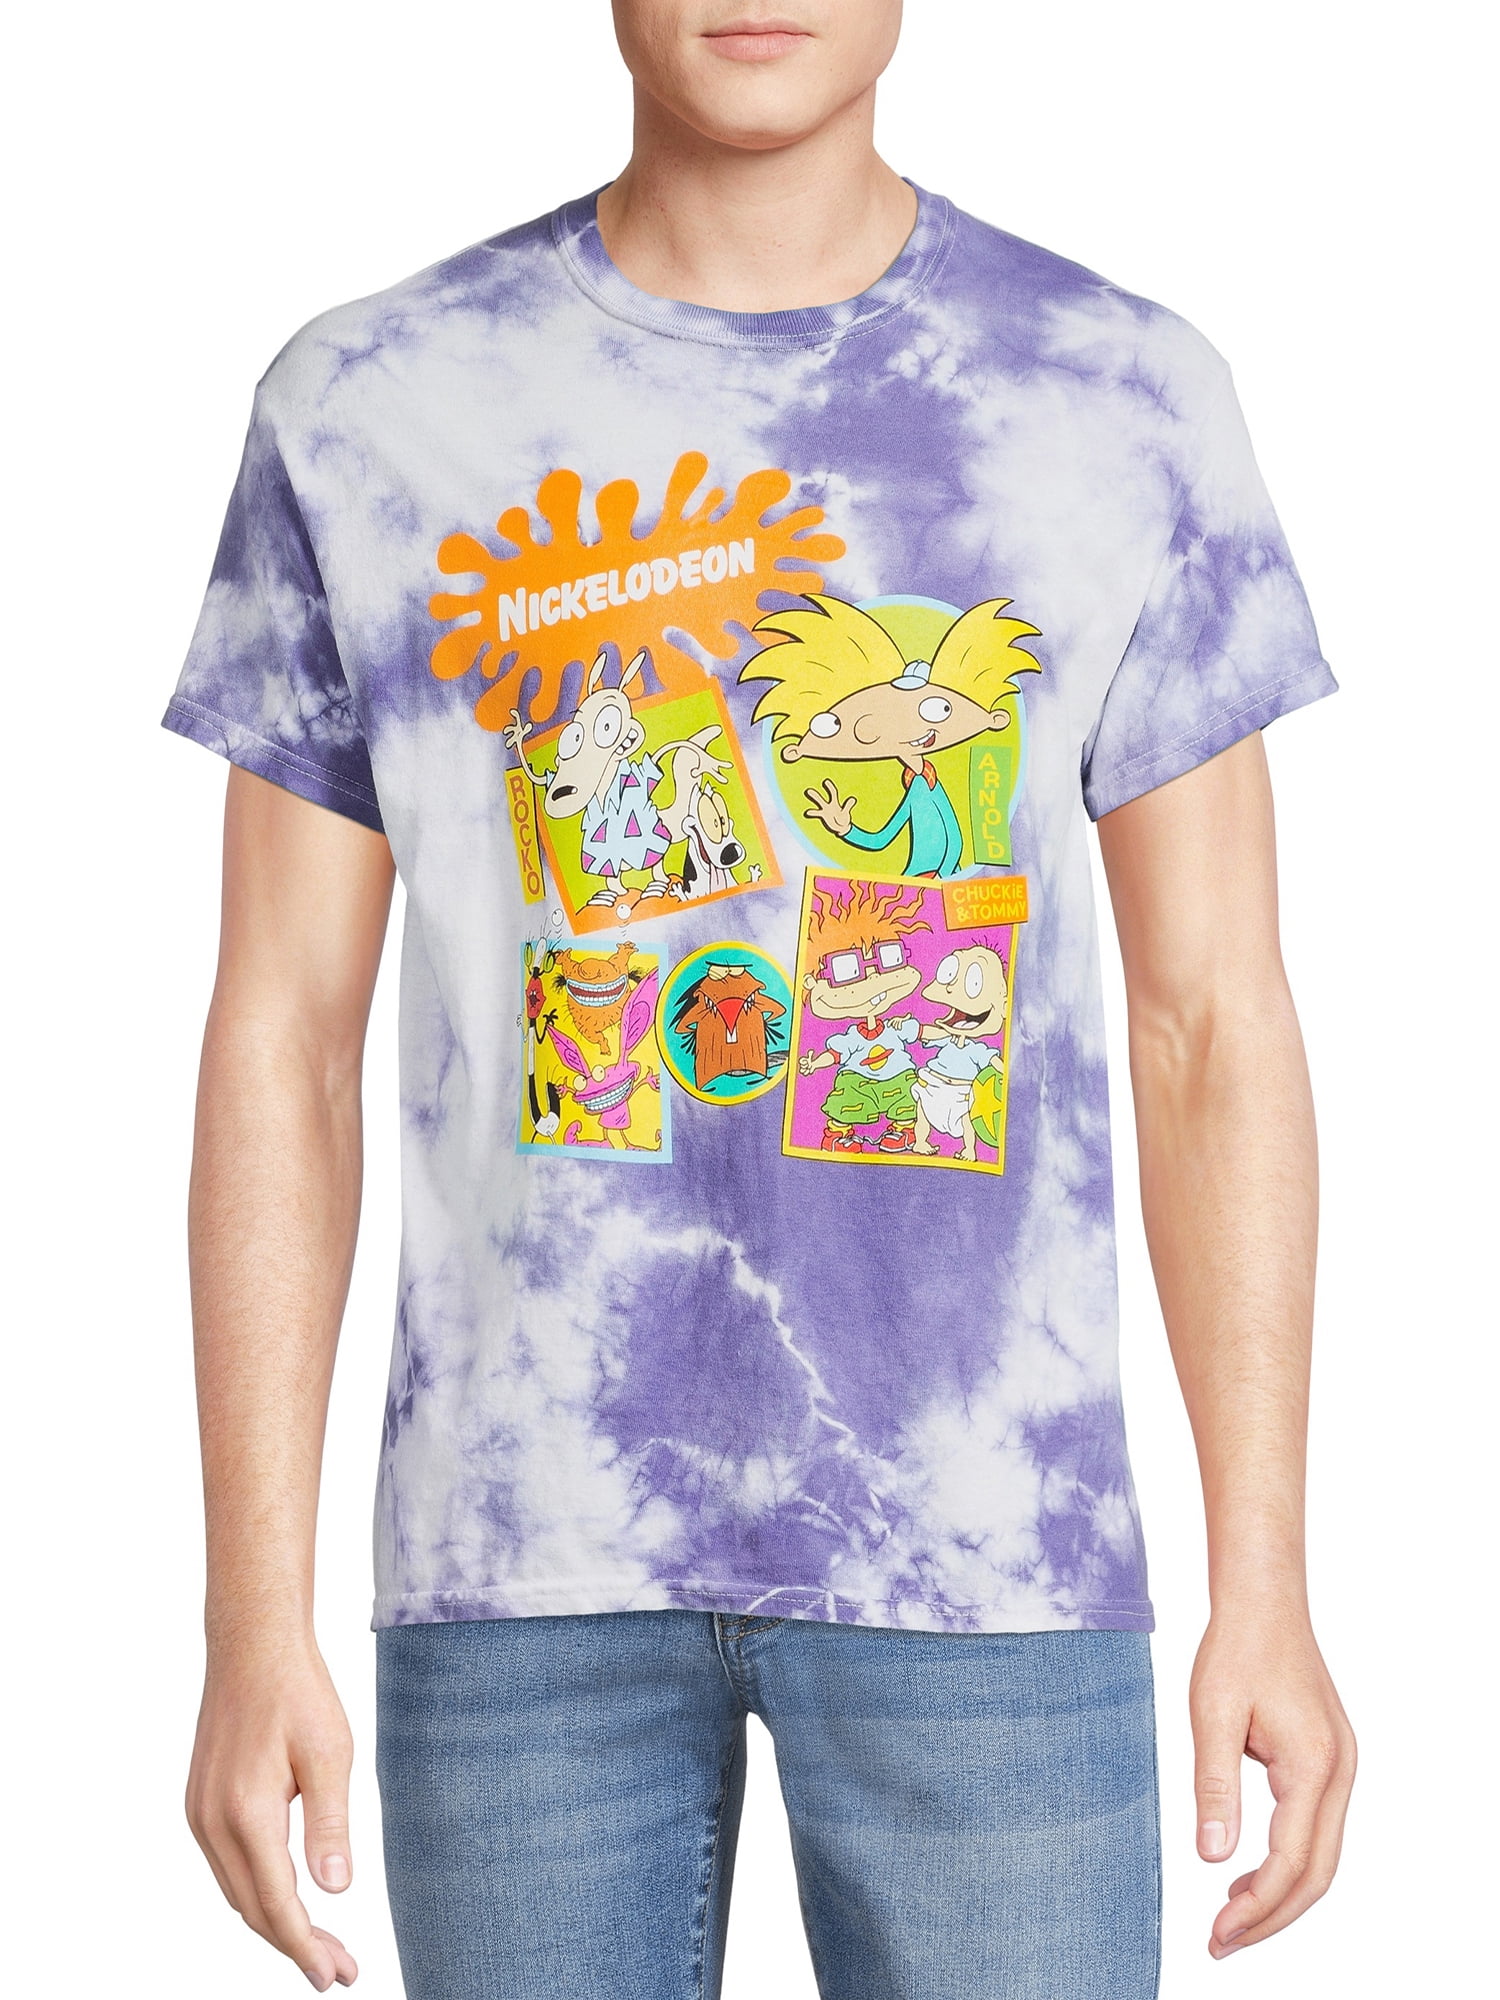 Nickelodeon Rugrats Men's The Crew At Play Tie-Dye T-Shirt Clothing ...